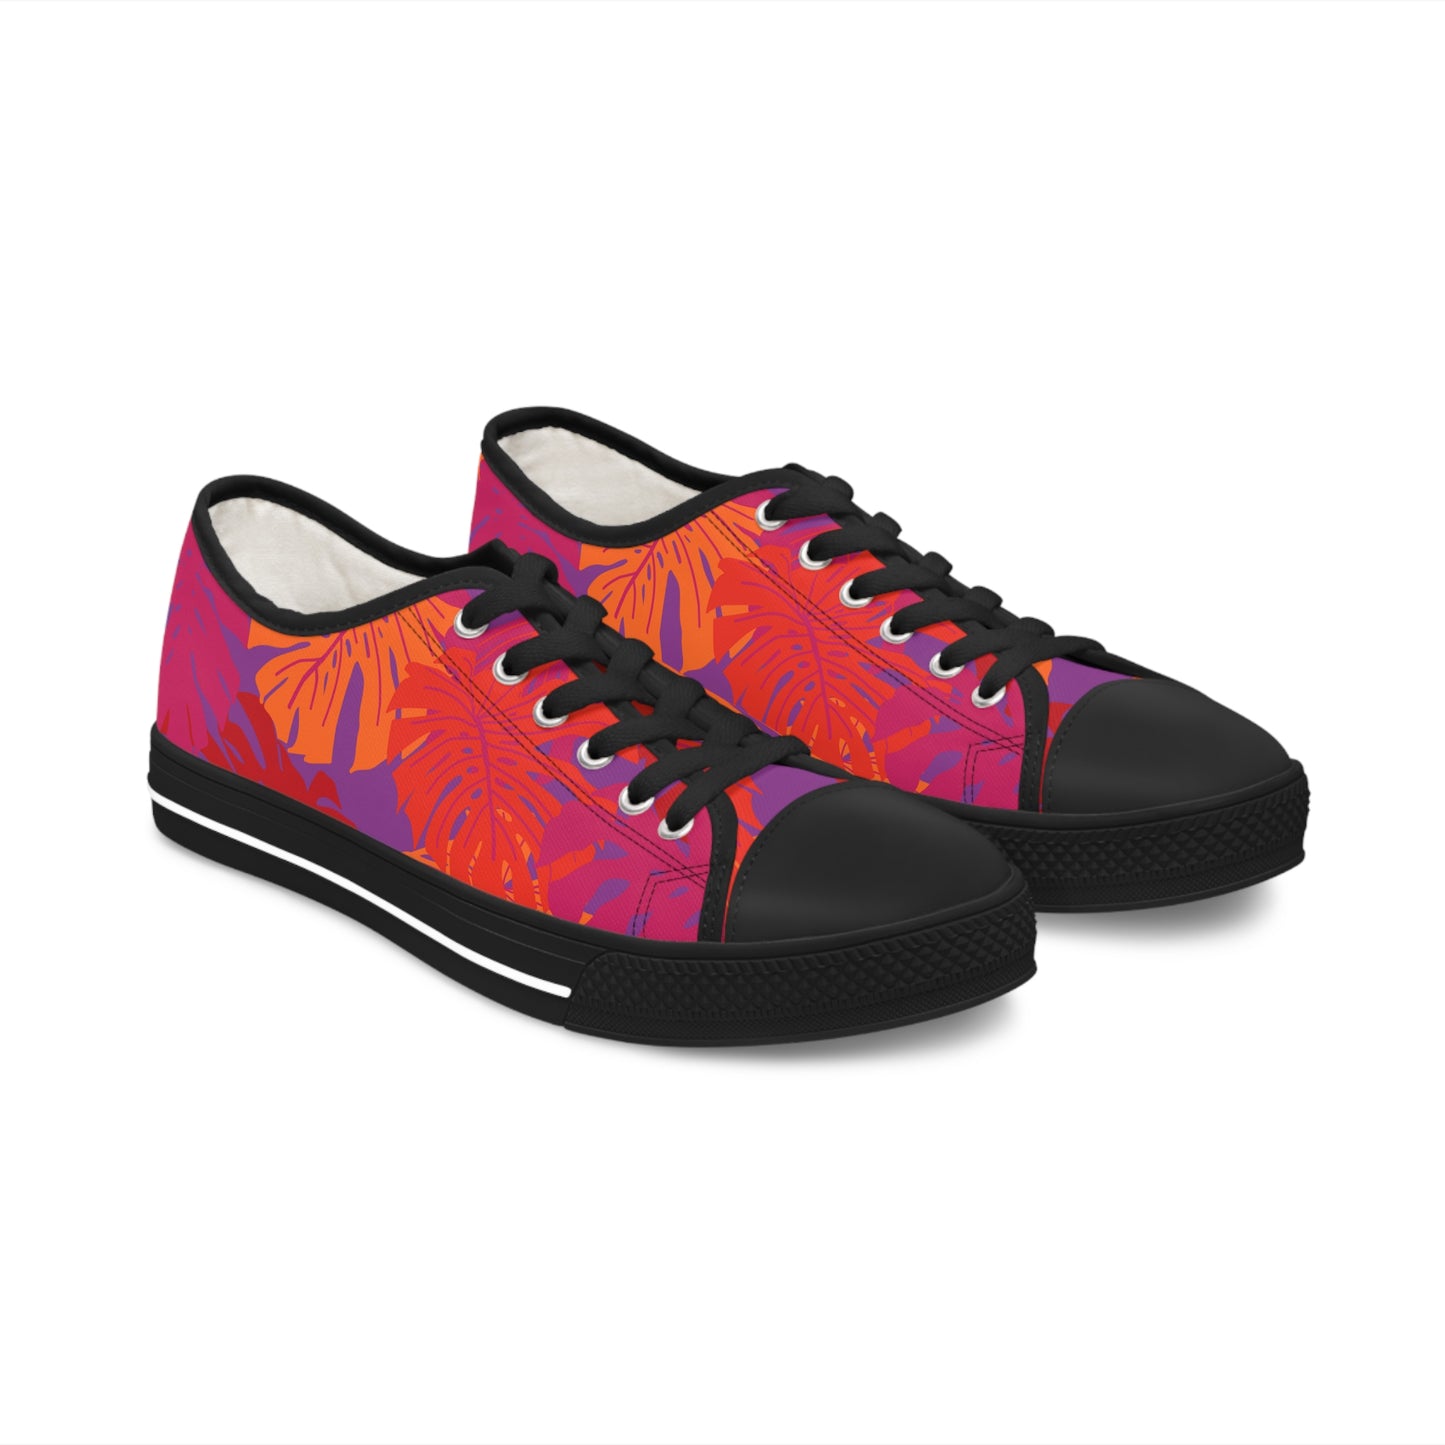 Monstera Madness Jungle Fire Women's Low-Top Sneakers